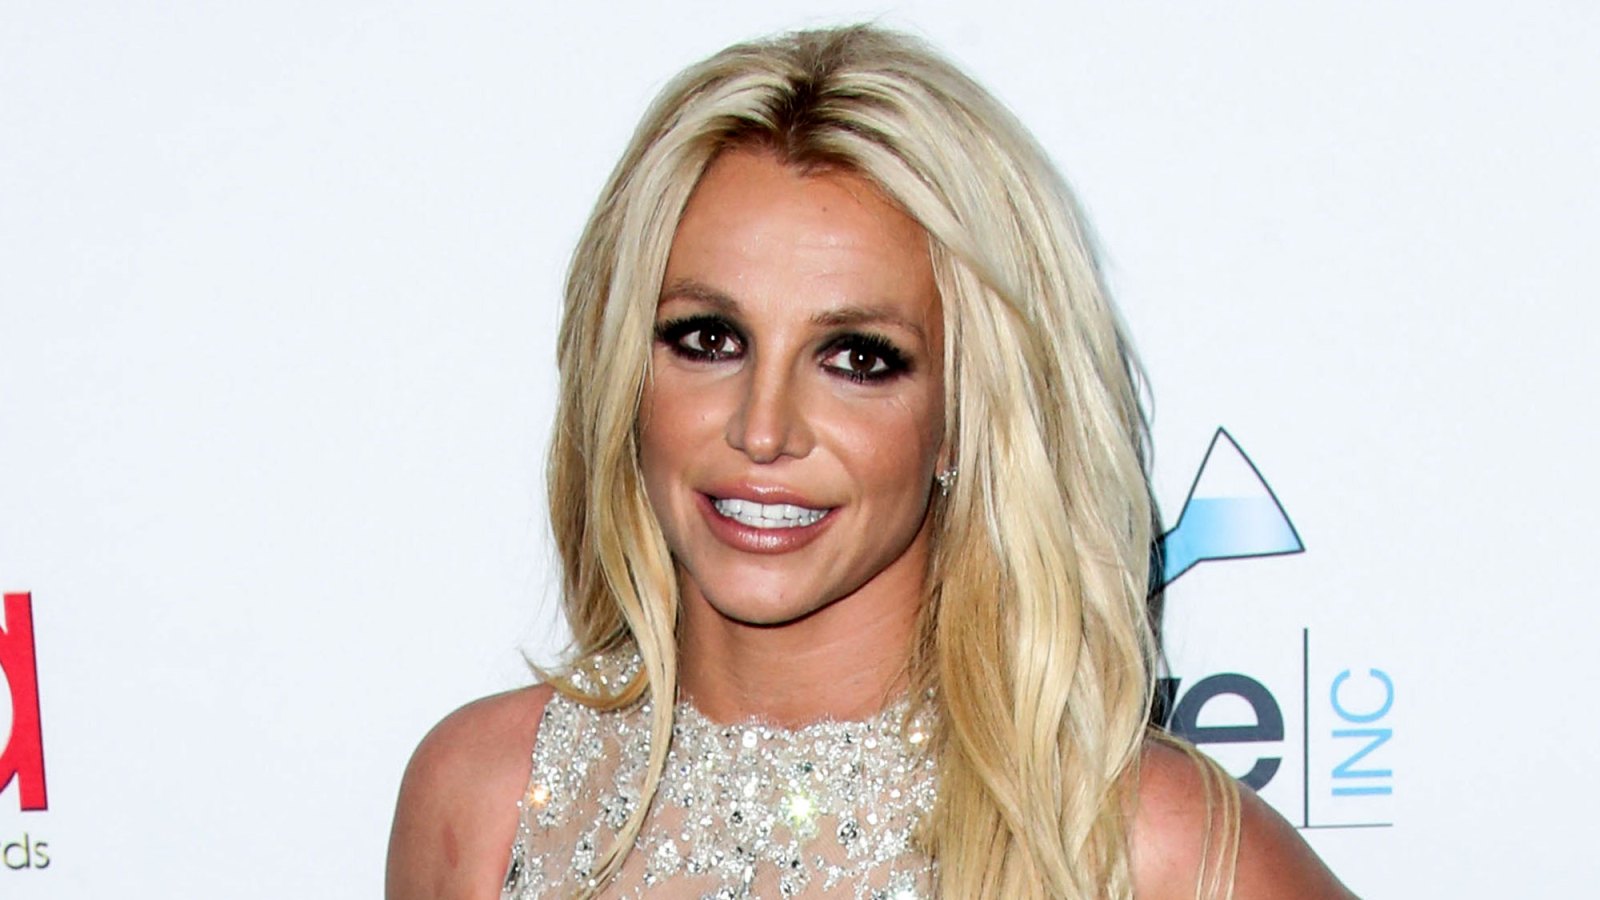 Britney Spears Teases Dramatic New Haircut: See the Photo